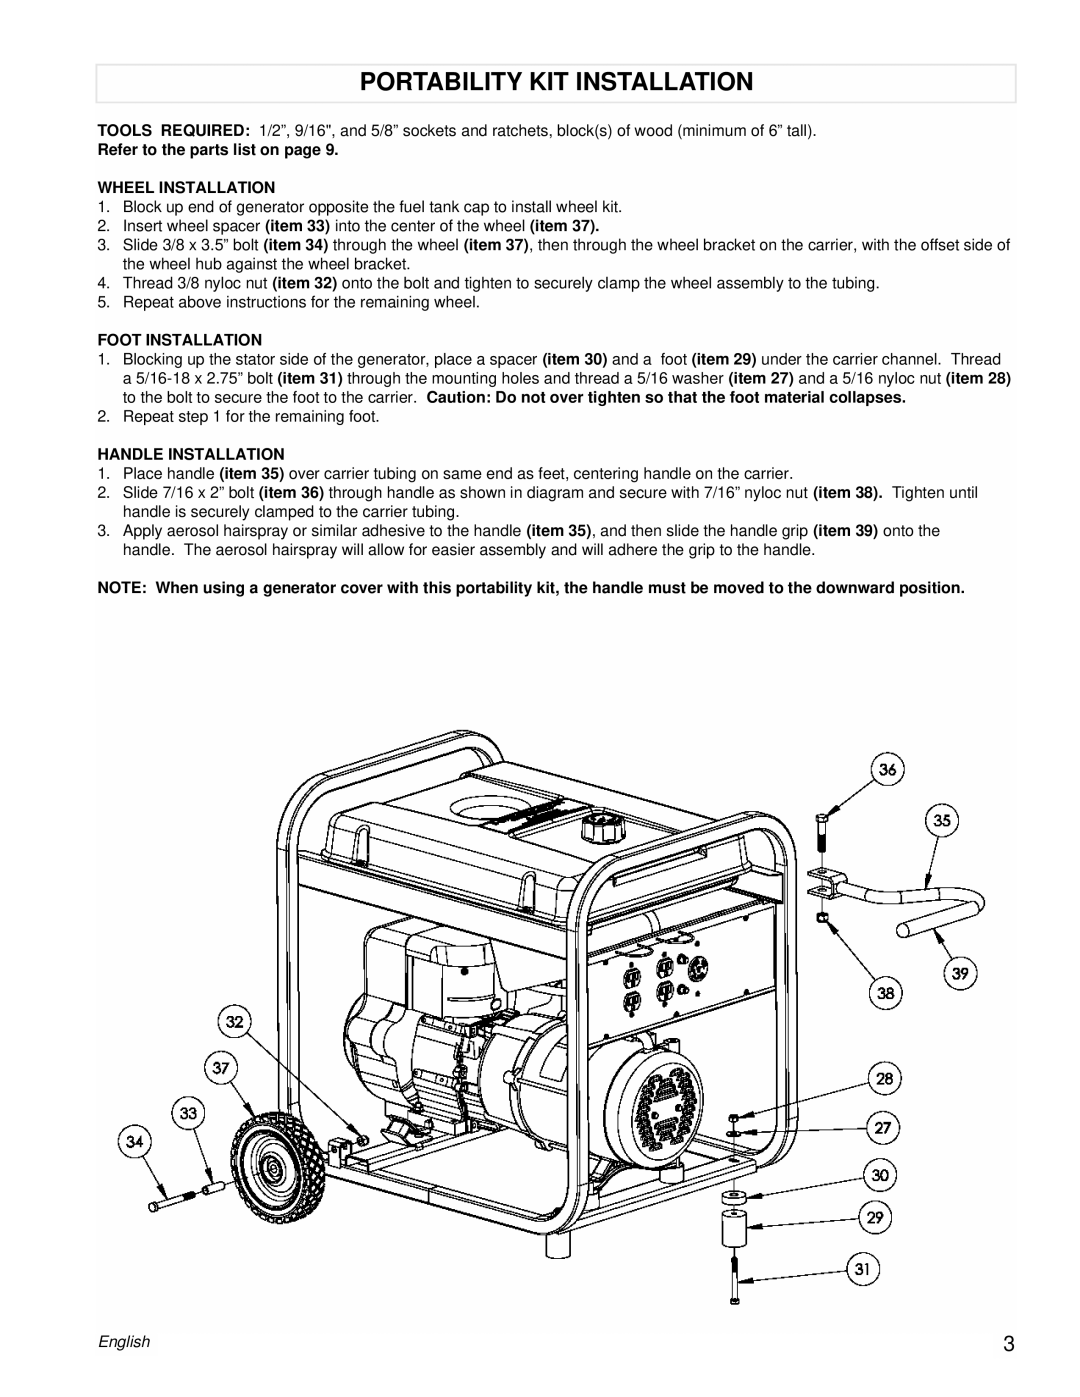 Powermate PM0525312.02 manual Portability Kit Installation, Refer to the parts list on page, Wheel Installation, English 